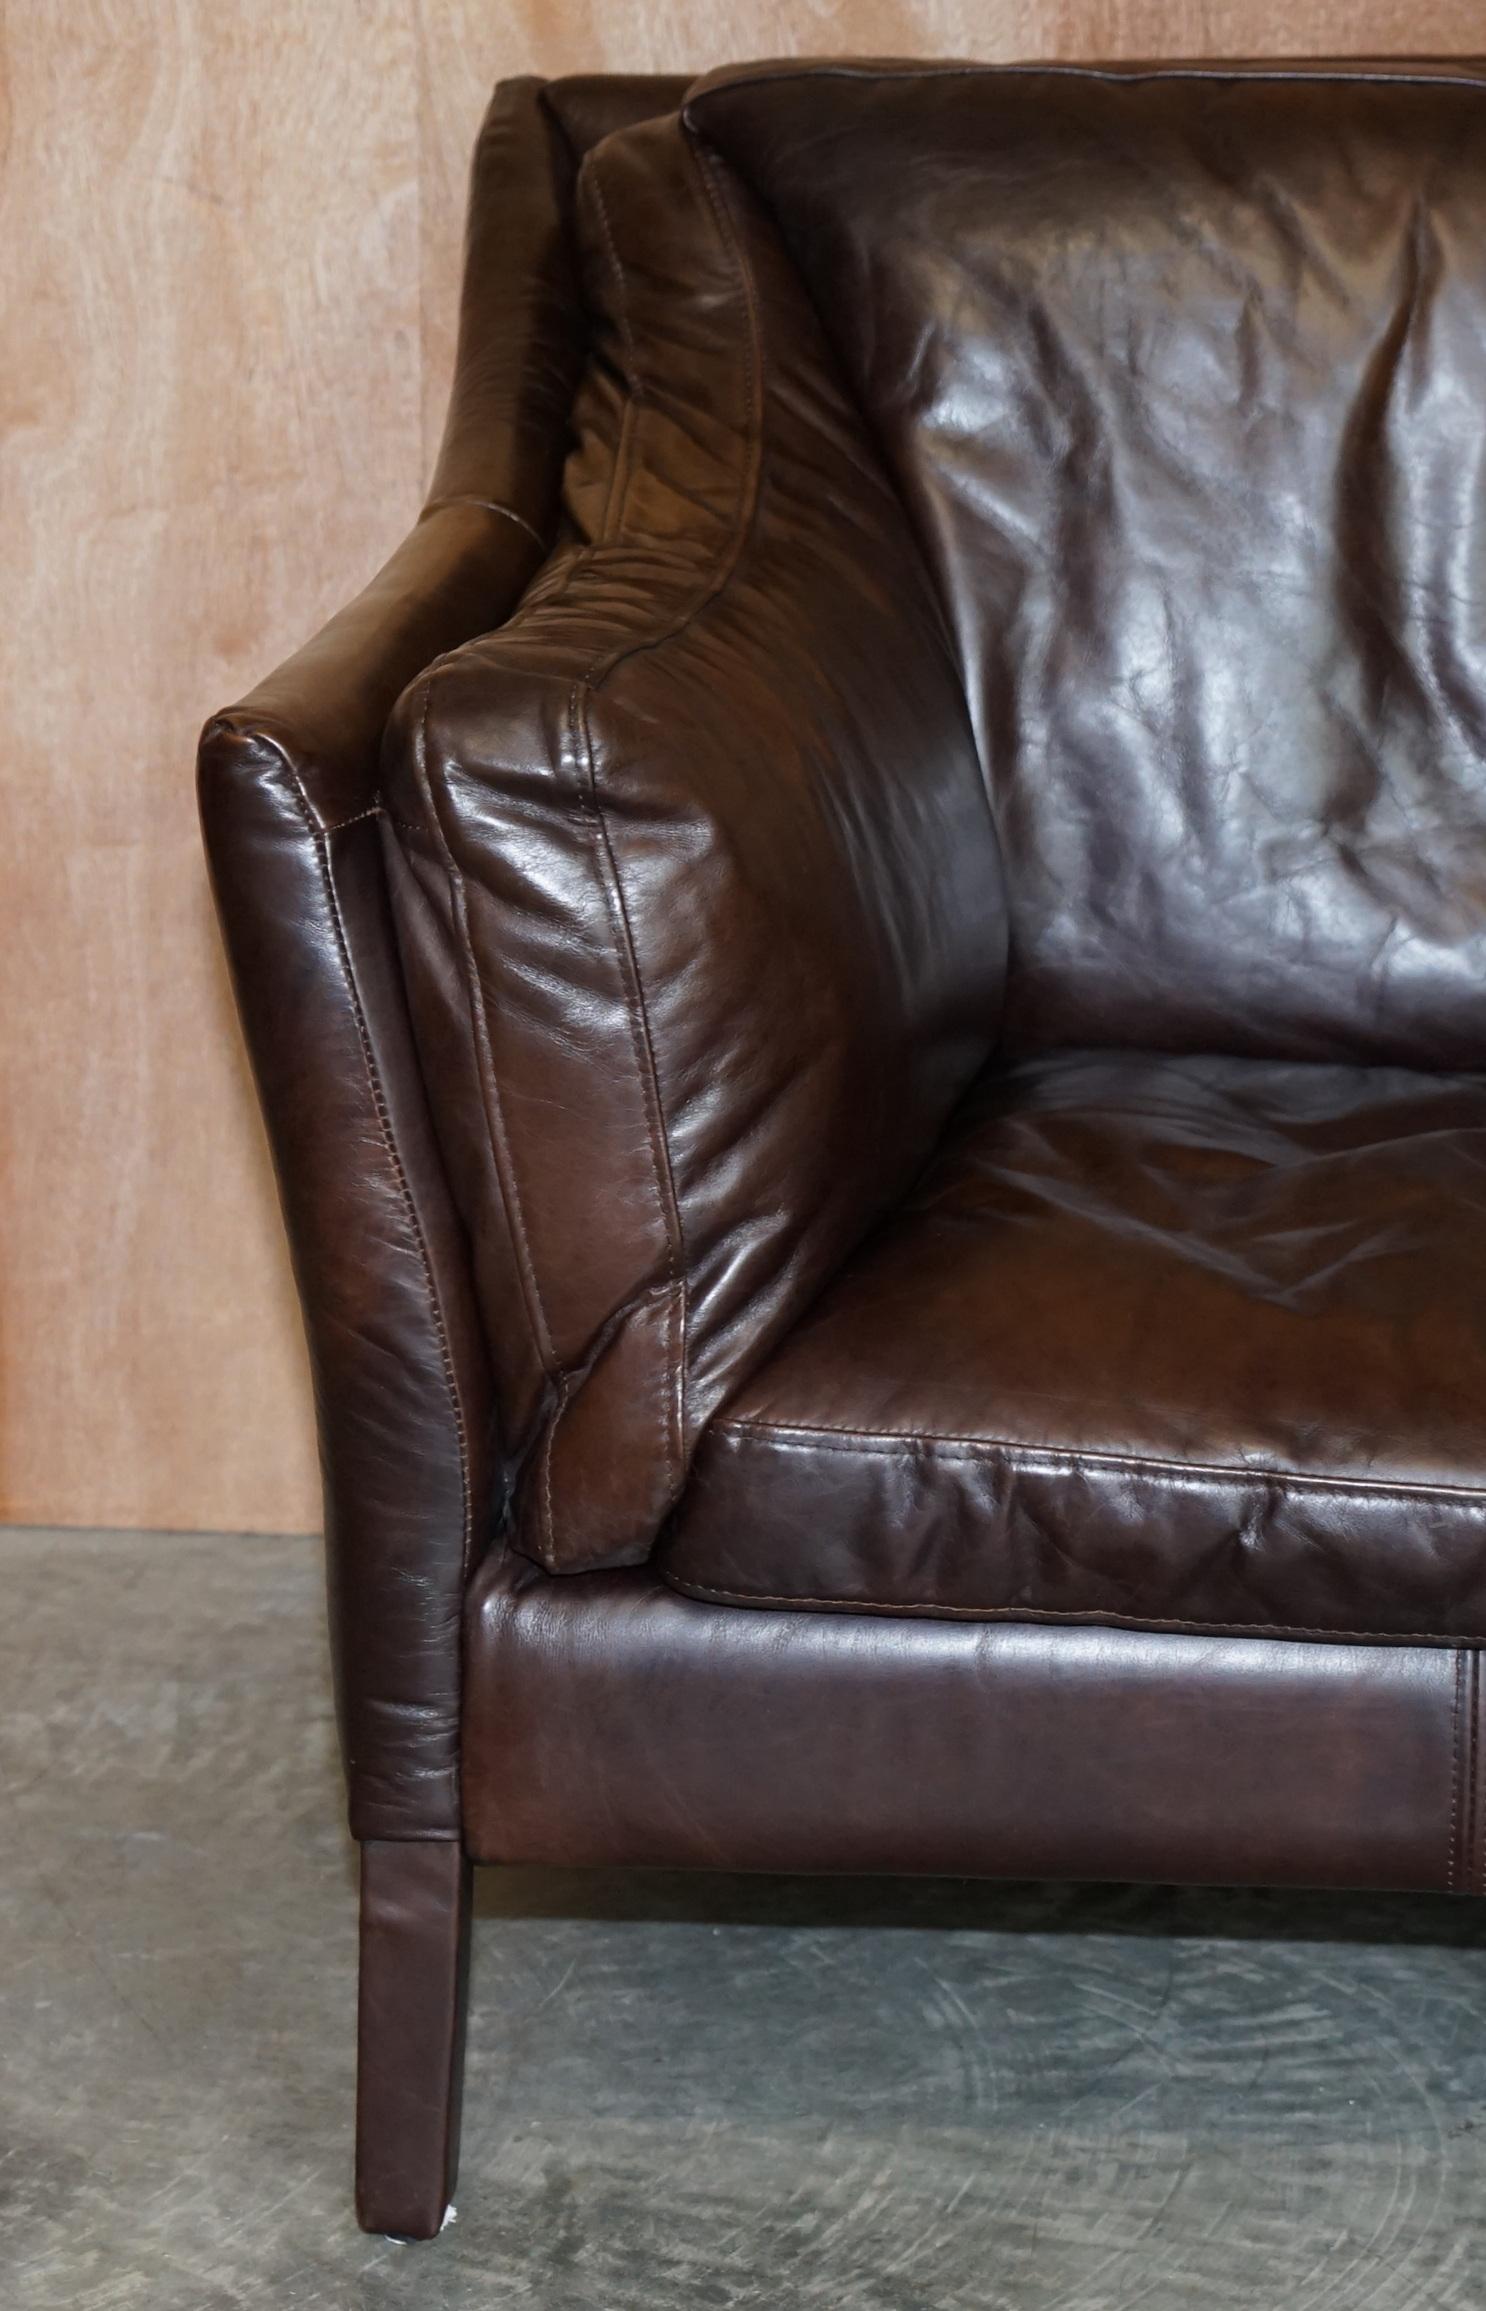 Halo Groucho Bike Tan Brown Leather Armchair Loveseat Part of a Large Suite 1